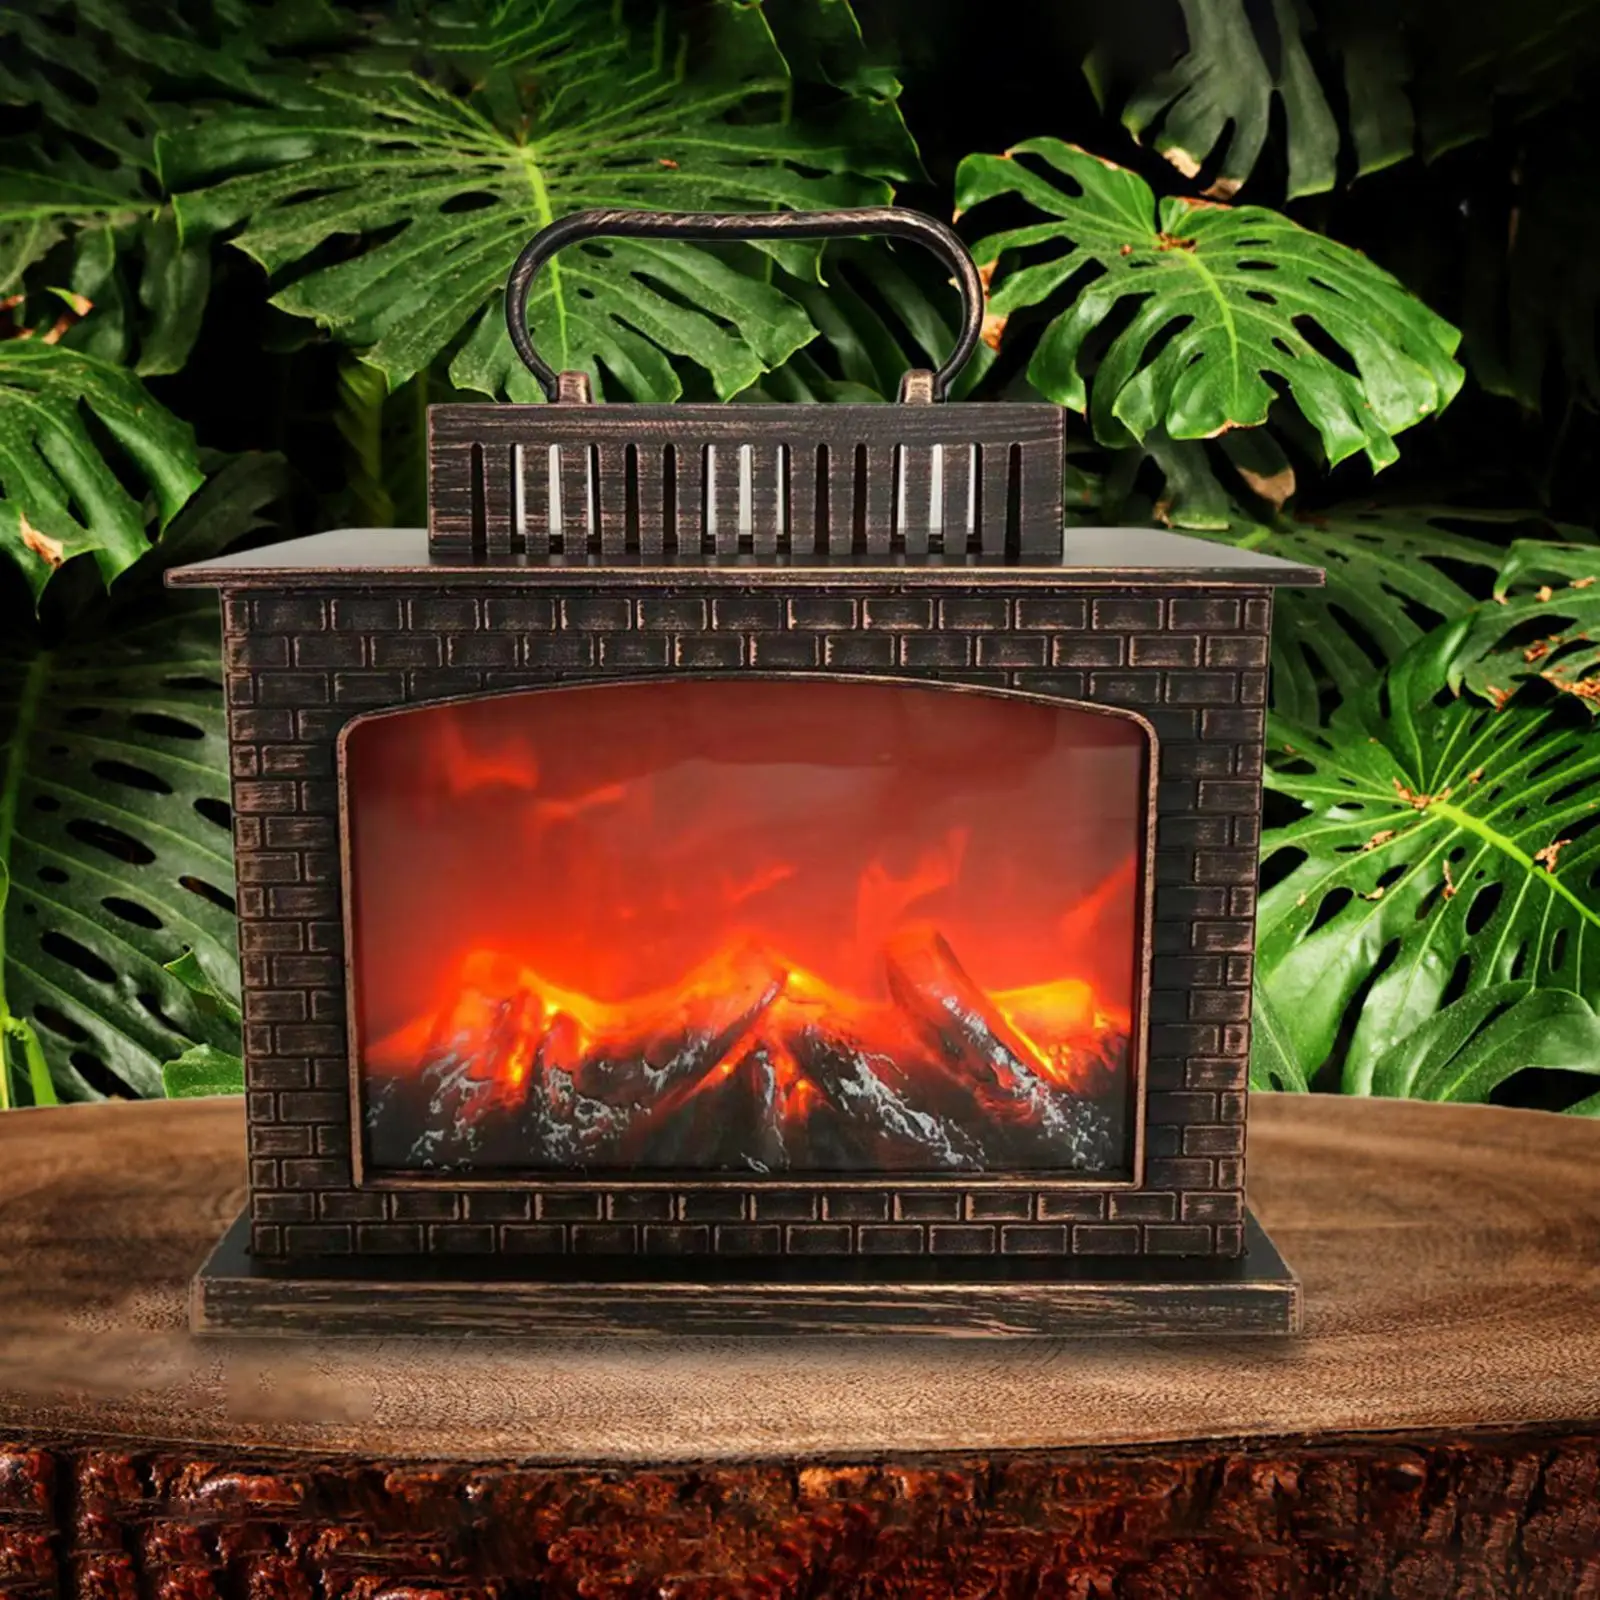 Simulation Fireplace Light Vintage Decorative Christmas Decoration USB Powered Realistic for Bedroom Home